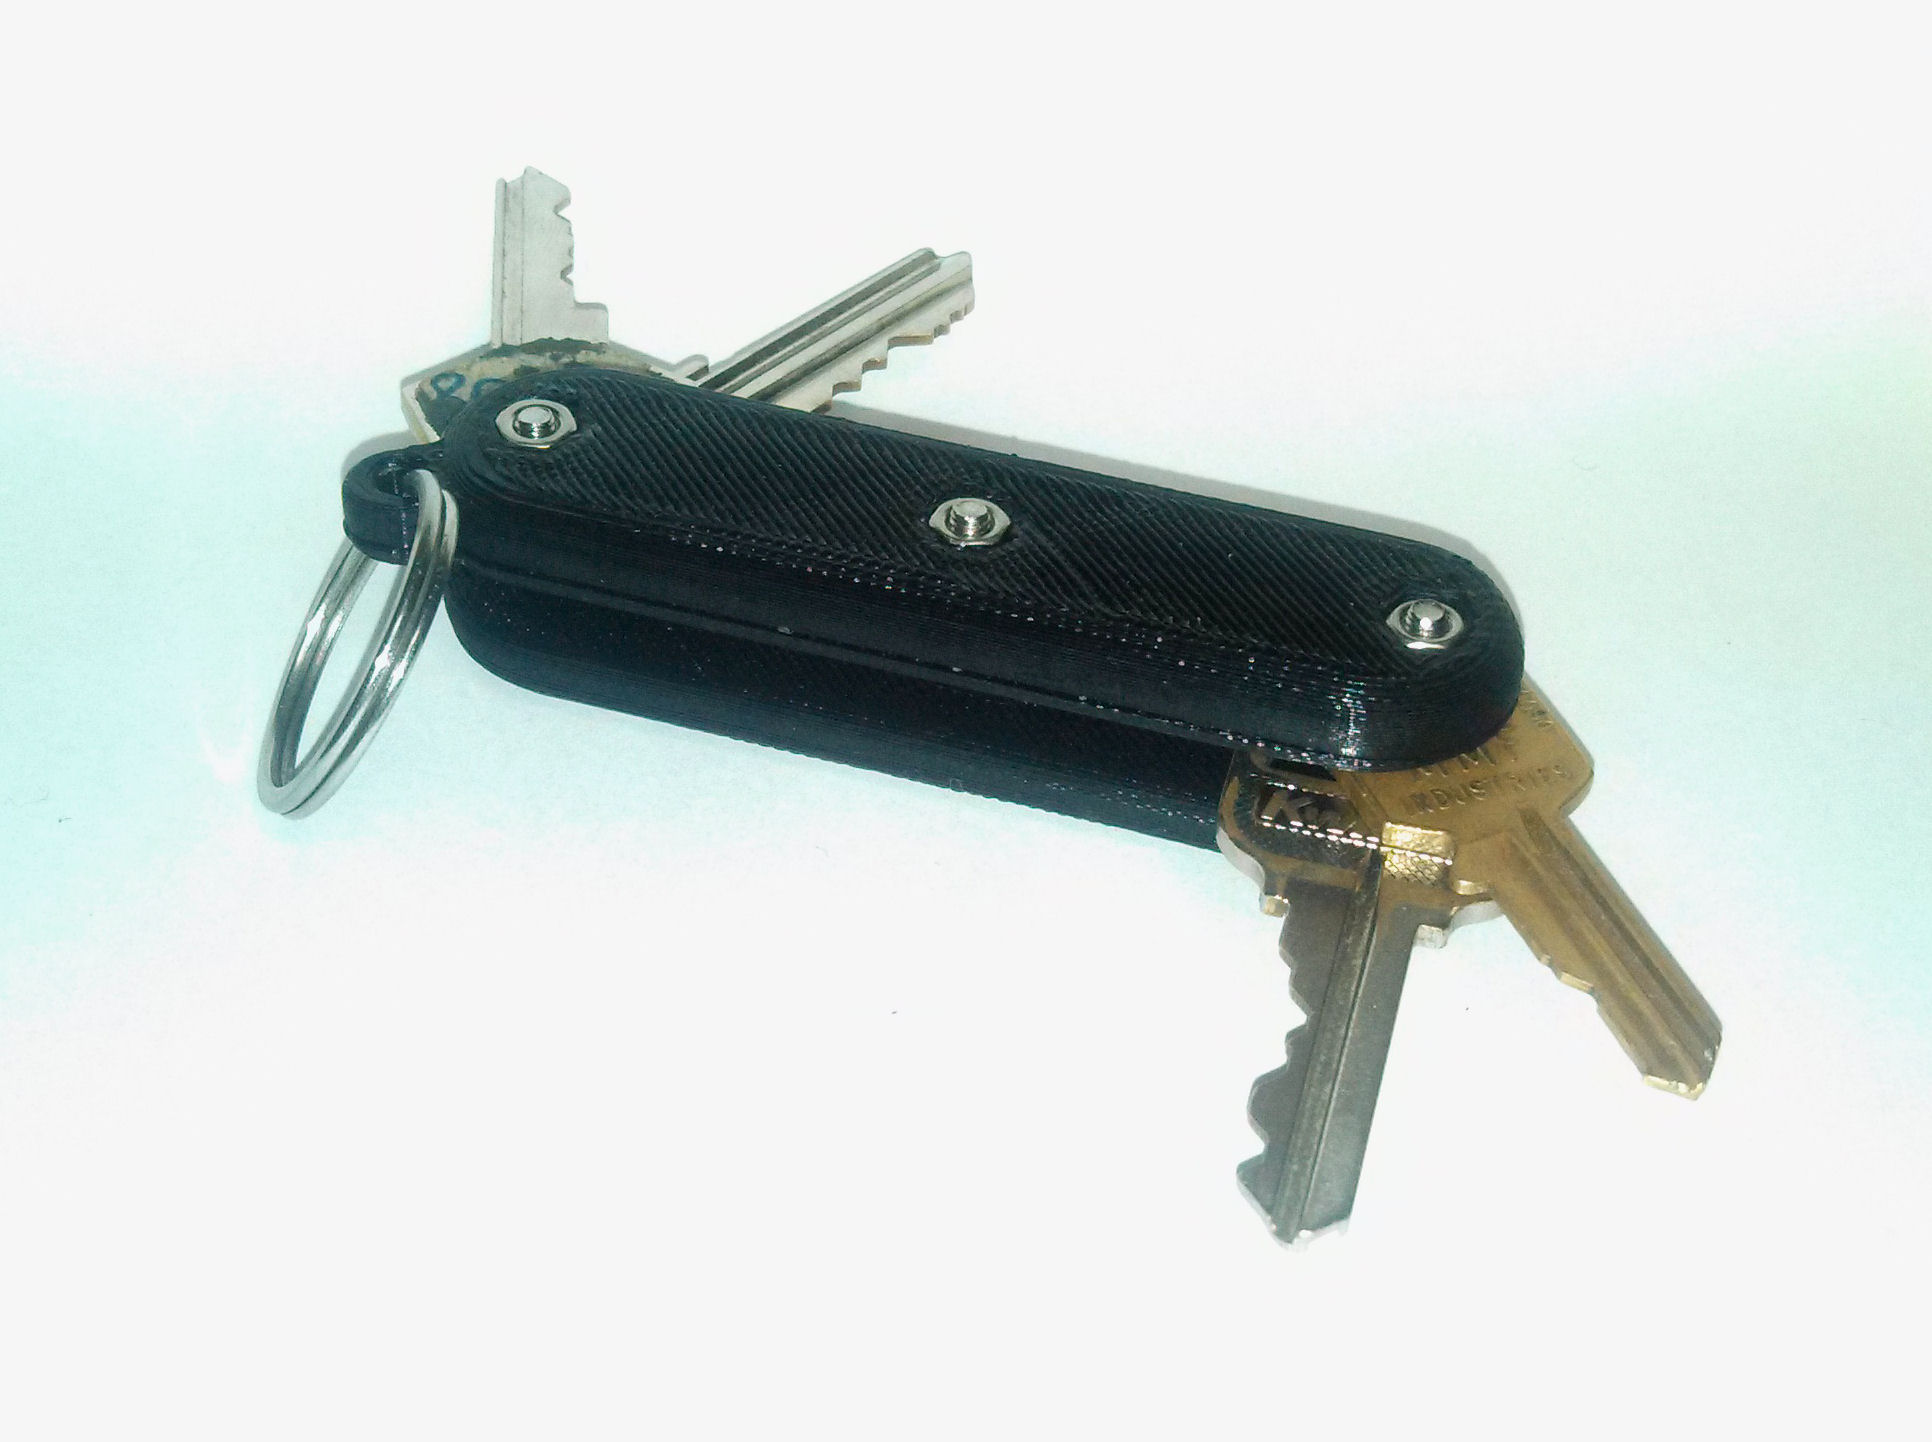 3-D printed Swiss Army knife style keychain